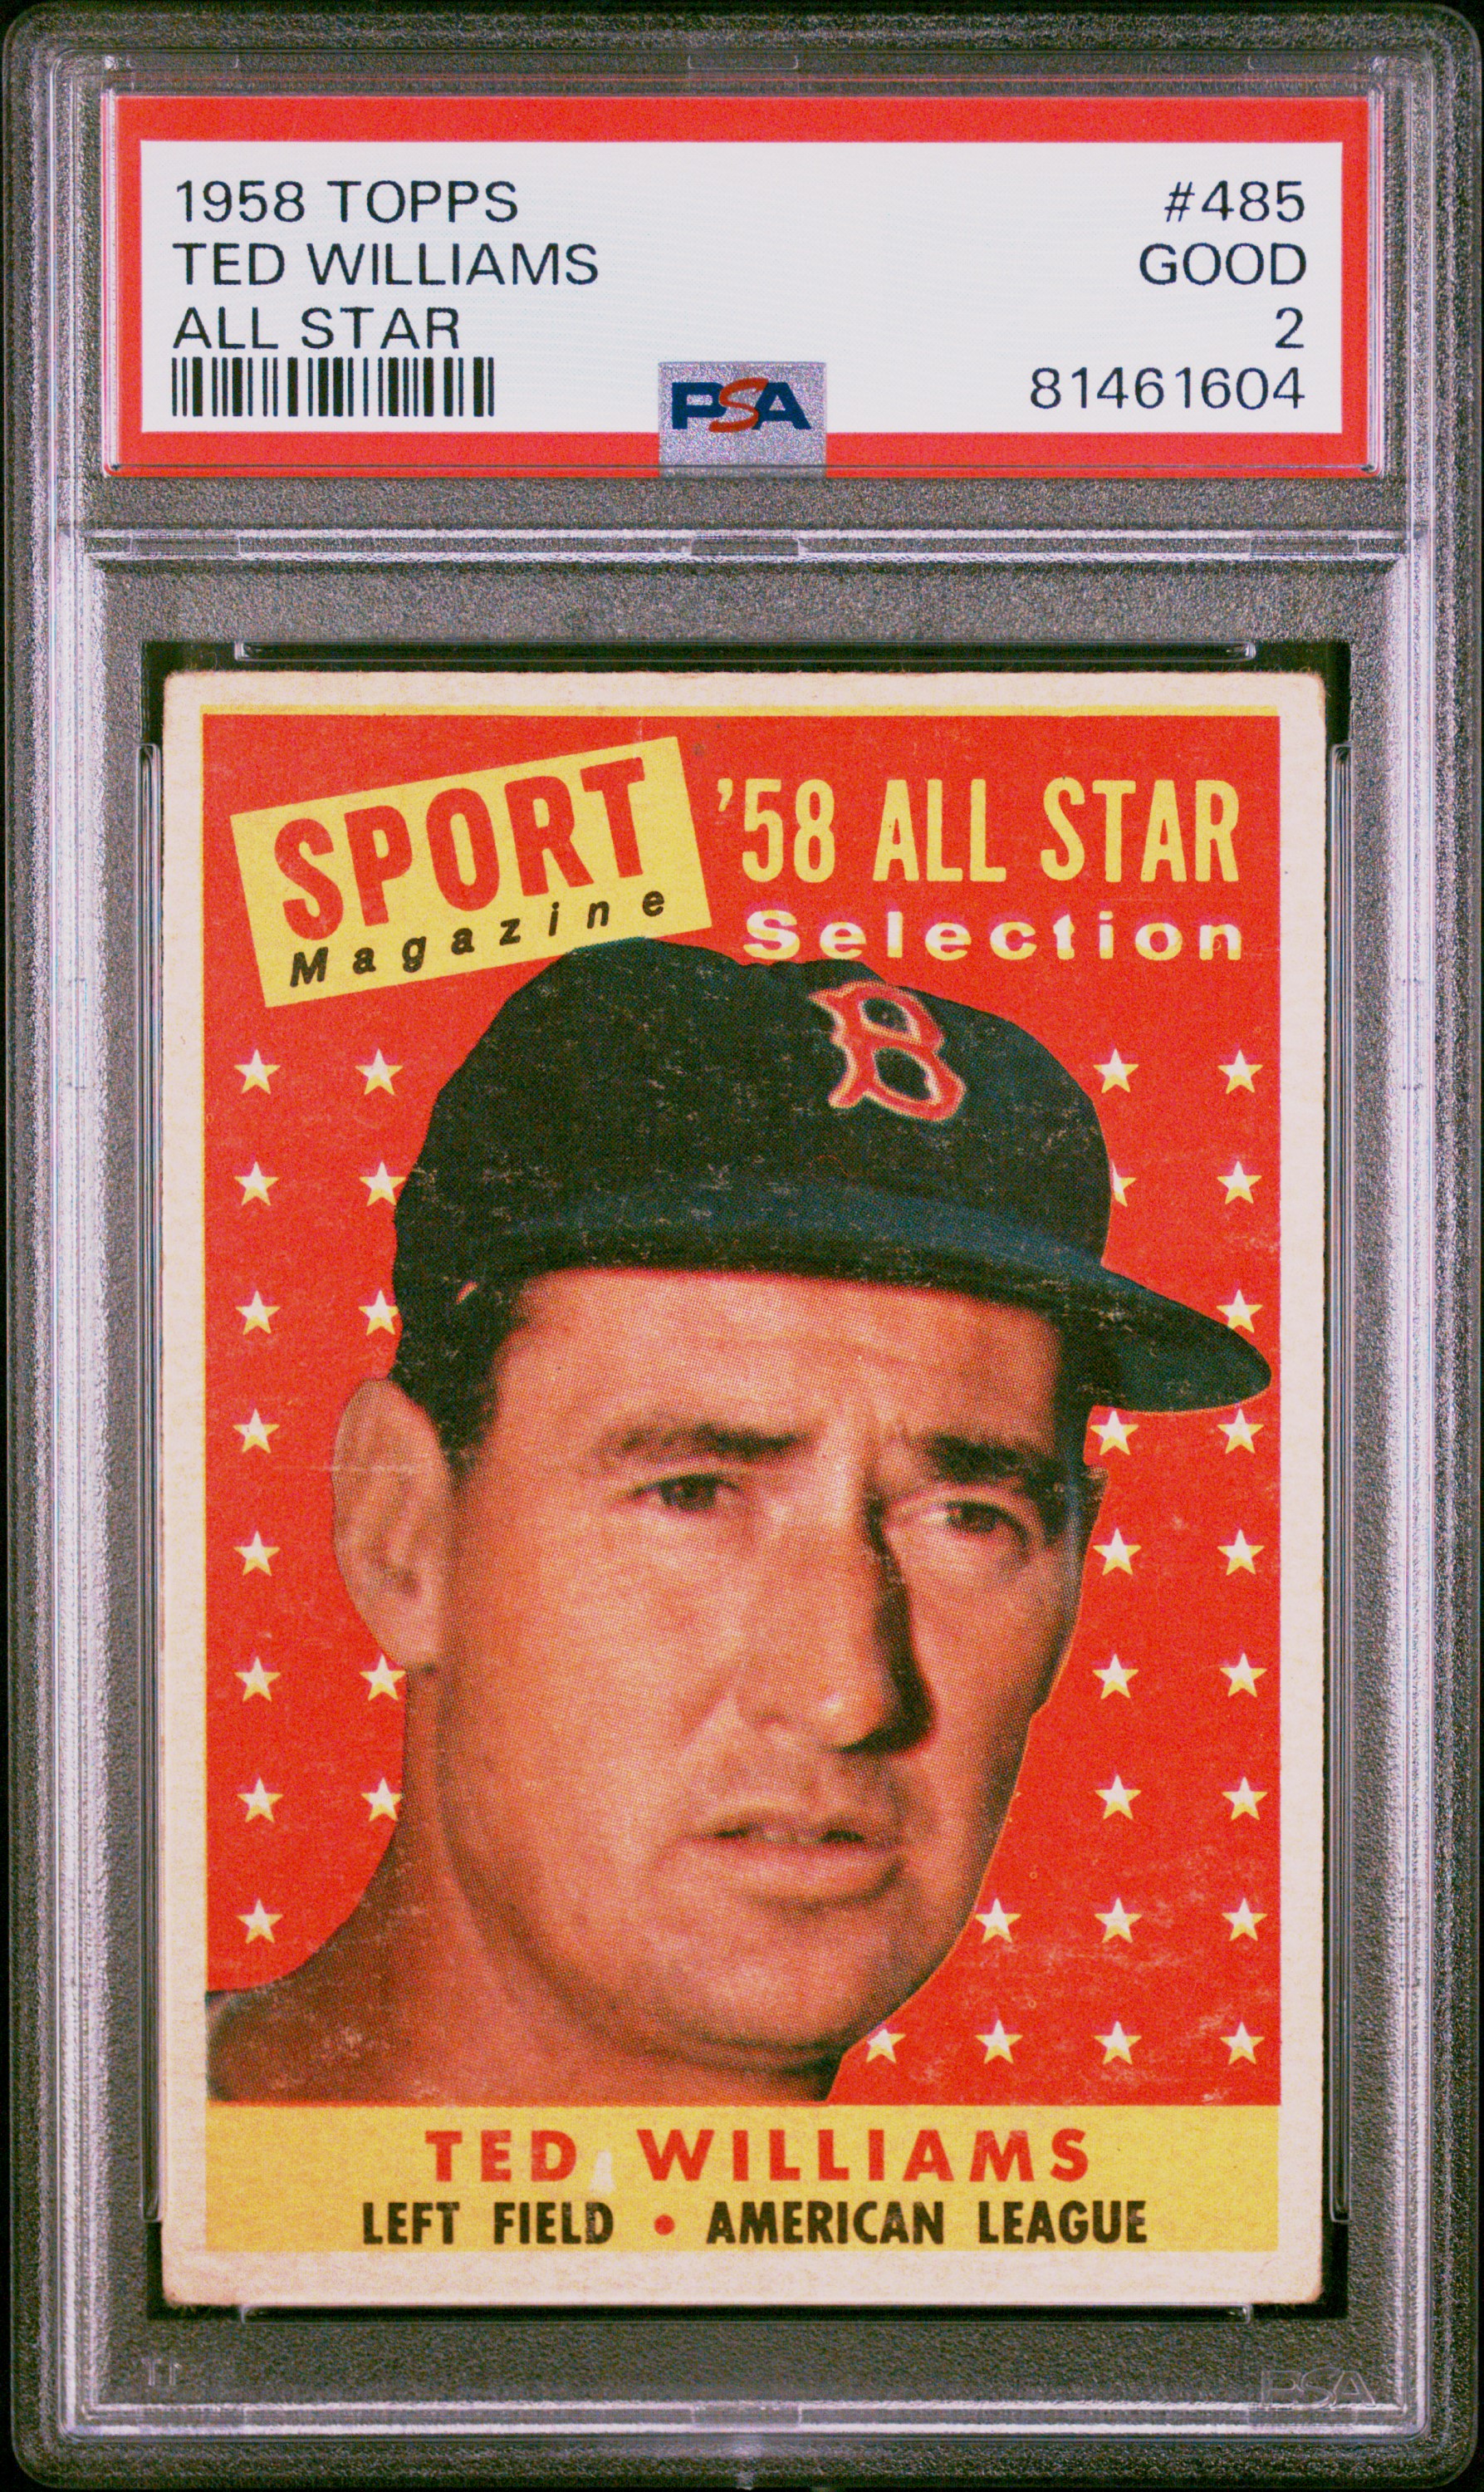 1958 Topps All Star #485 Ted Williams – PSA GD 2